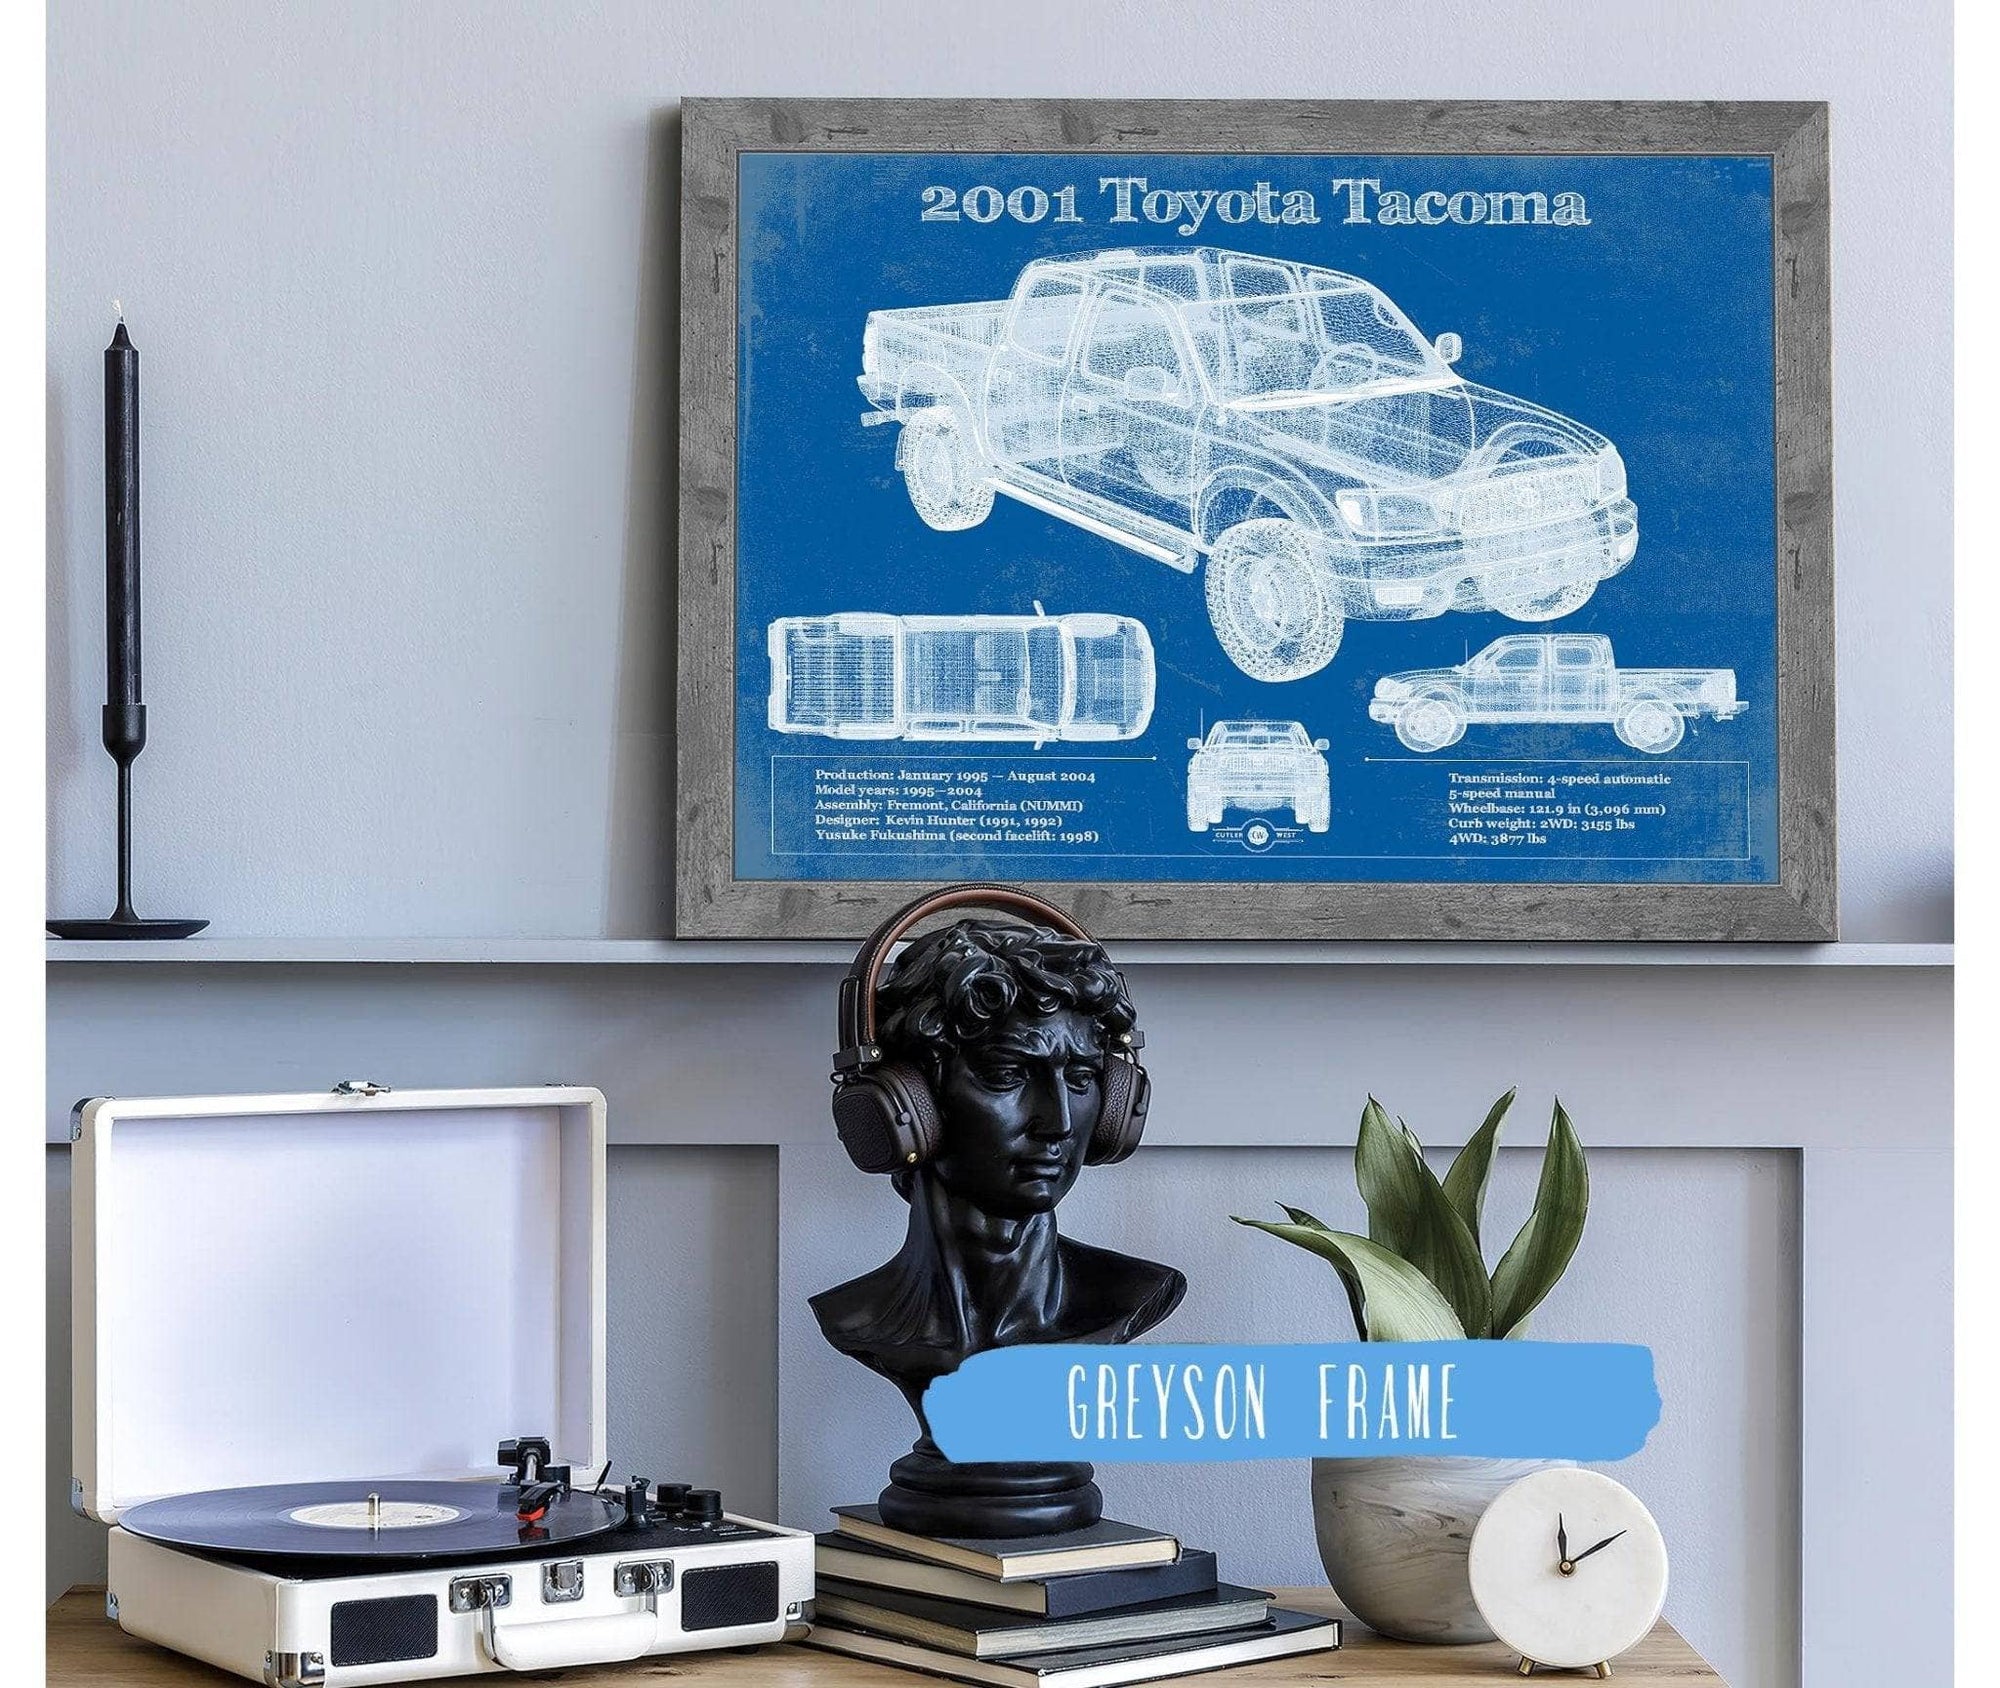 Cutler West Toyota Collection 14" x 11" / Greyson Frame 2001 Toyota Tacoma Double Cab Limited Vintage Blueprint Auto Print 933311112_39306